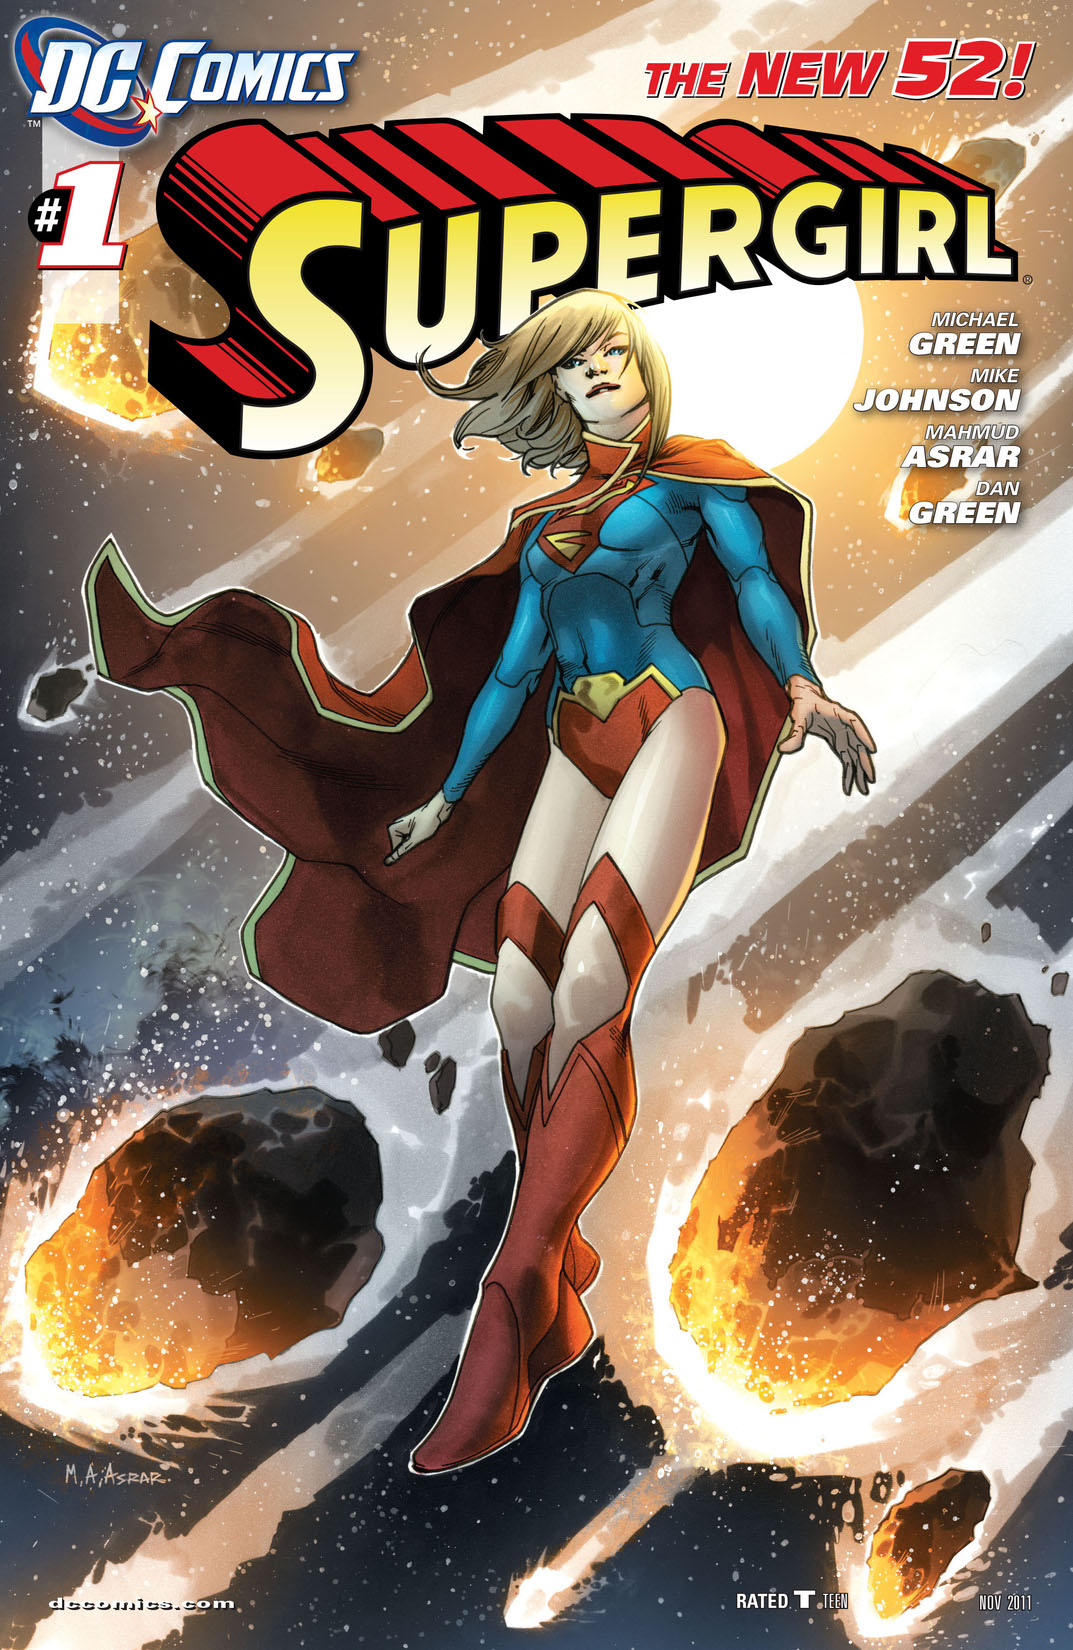 Supergirl (2011-) #1 preview images